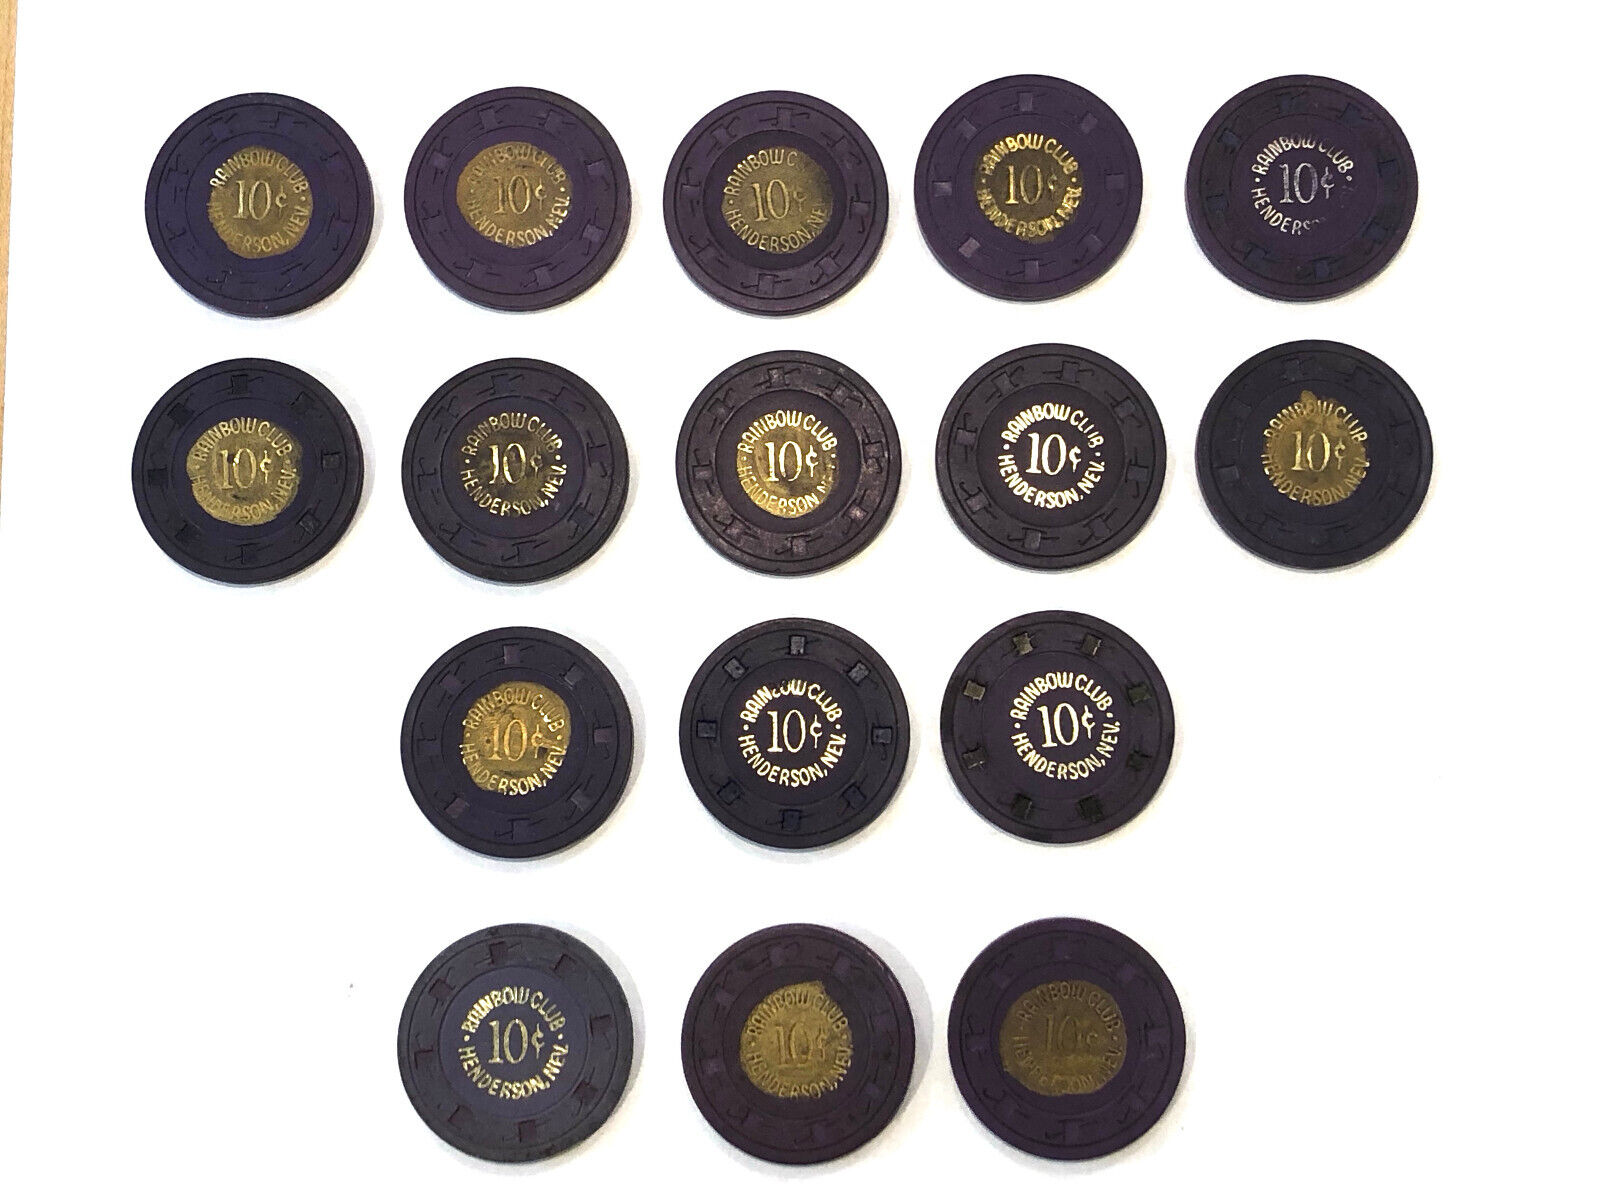 Vintage collection of 16 rare Rainbow Club ten cent casino chips from '67-'70